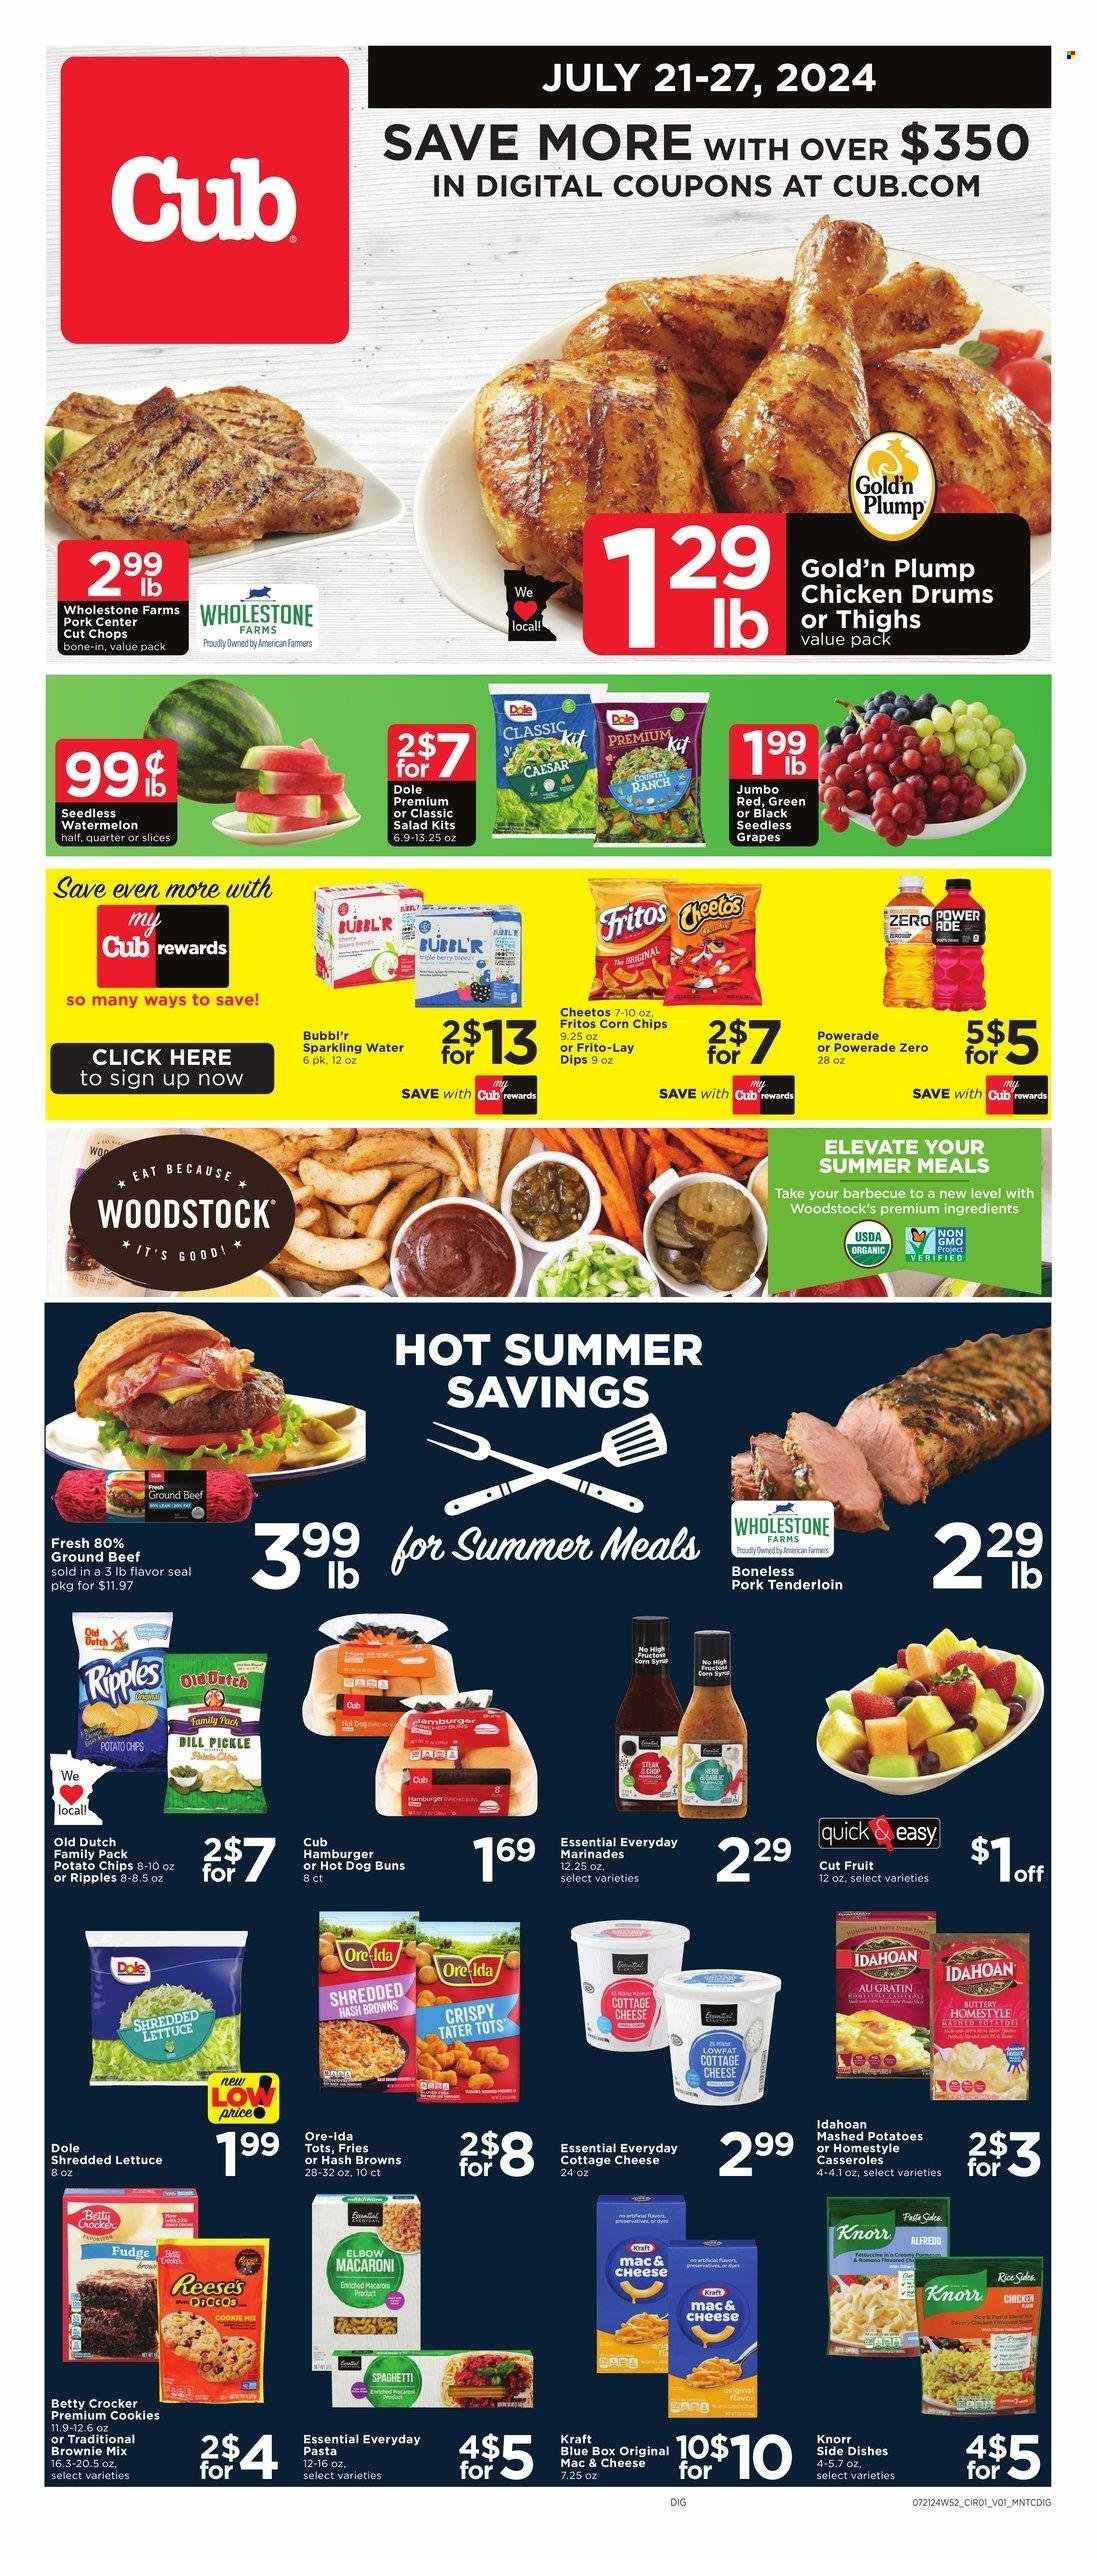 thumbnail - Cub Foods Flyer - 07/21/2024 - 07/27/2024 - Sales products - hot dog rolls, buns, burger buns, brownie mix, Dole, shredded lettuce, grapes, seedless grapes, mac and cheese, mashed potatoes, spaghetti, macaroni, Knorr, pasta sides, Kraft®, ready meal, rice sides, cottage cheese, Reese's, hash browns, potato fries, Ore-Ida, tater tots, Fritos, potato chips, Cheetos, chips, corn chips, Frito-Lay, salty snack, baking mix, marinade, corn syrup, syrup, Powerade, energy drink, antioxidant drink, sparkling water, water, beef meat, ground beef, pork meat, pork tenderloin. Page 1.